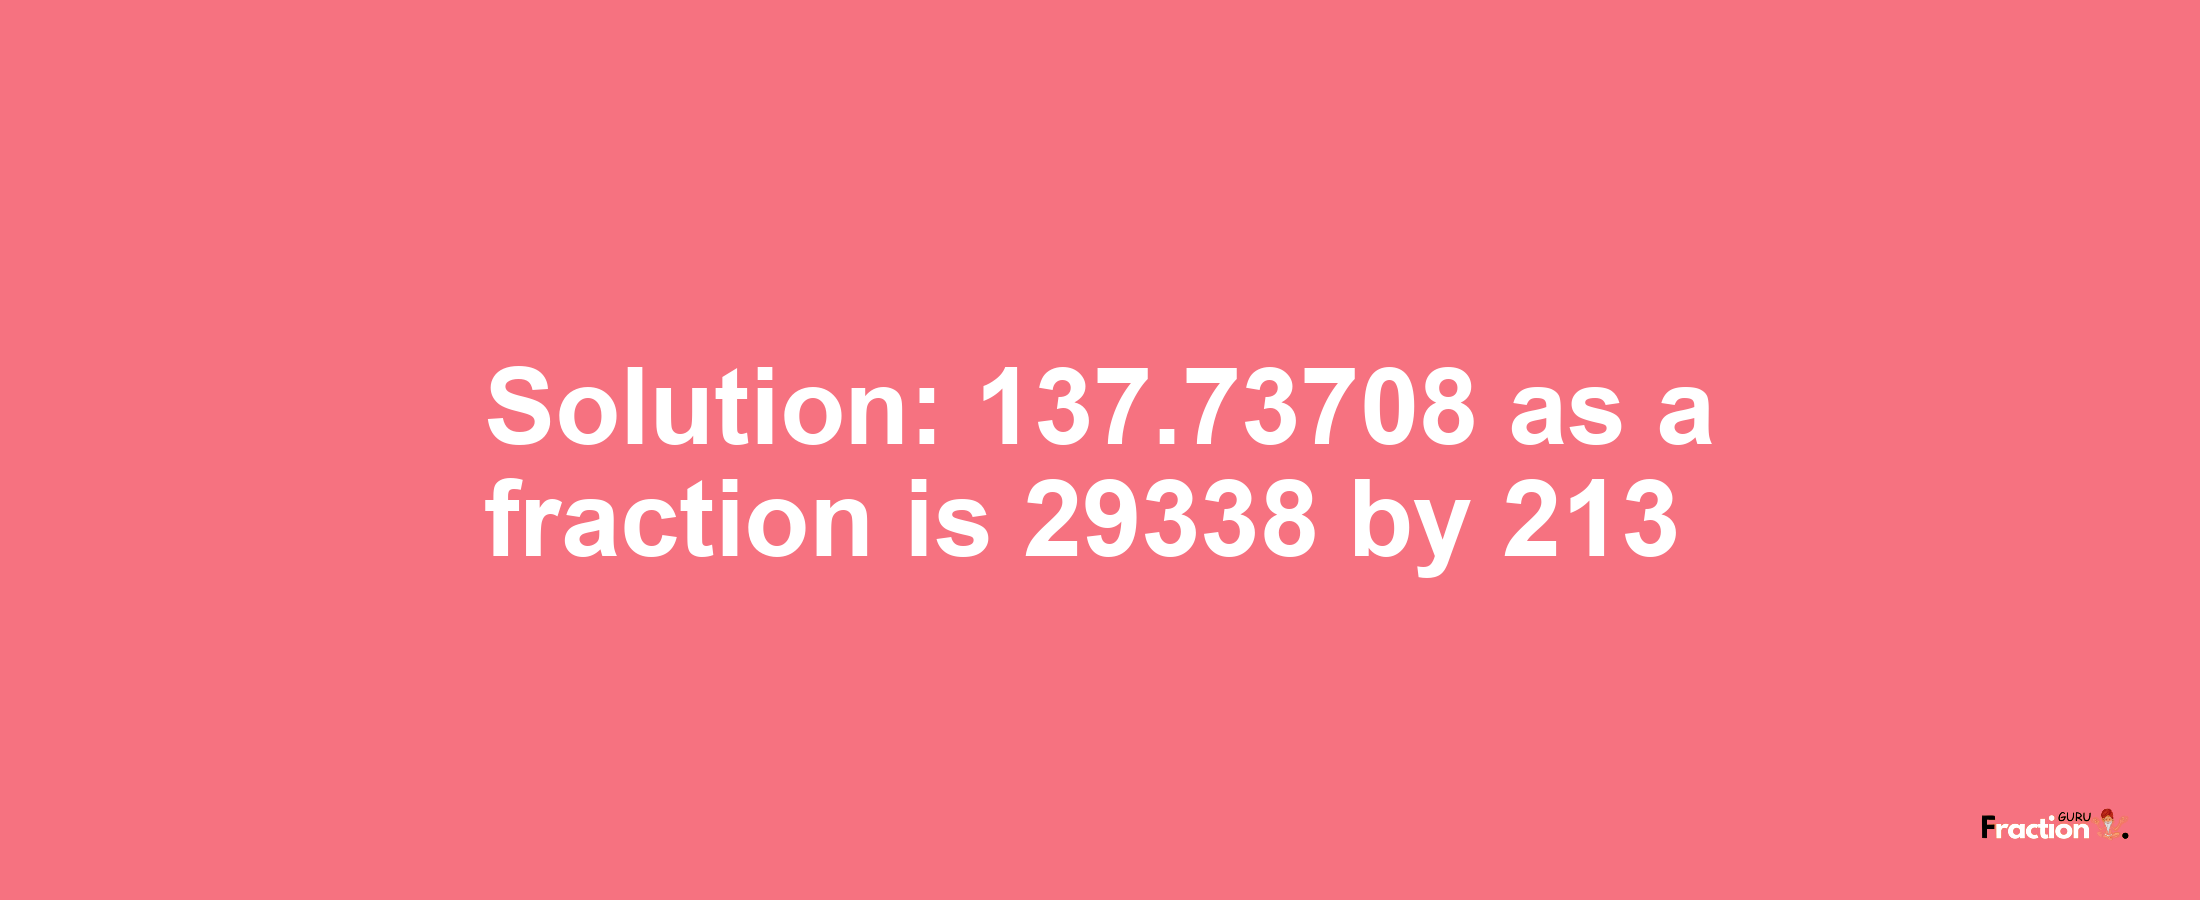 Solution:137.73708 as a fraction is 29338/213